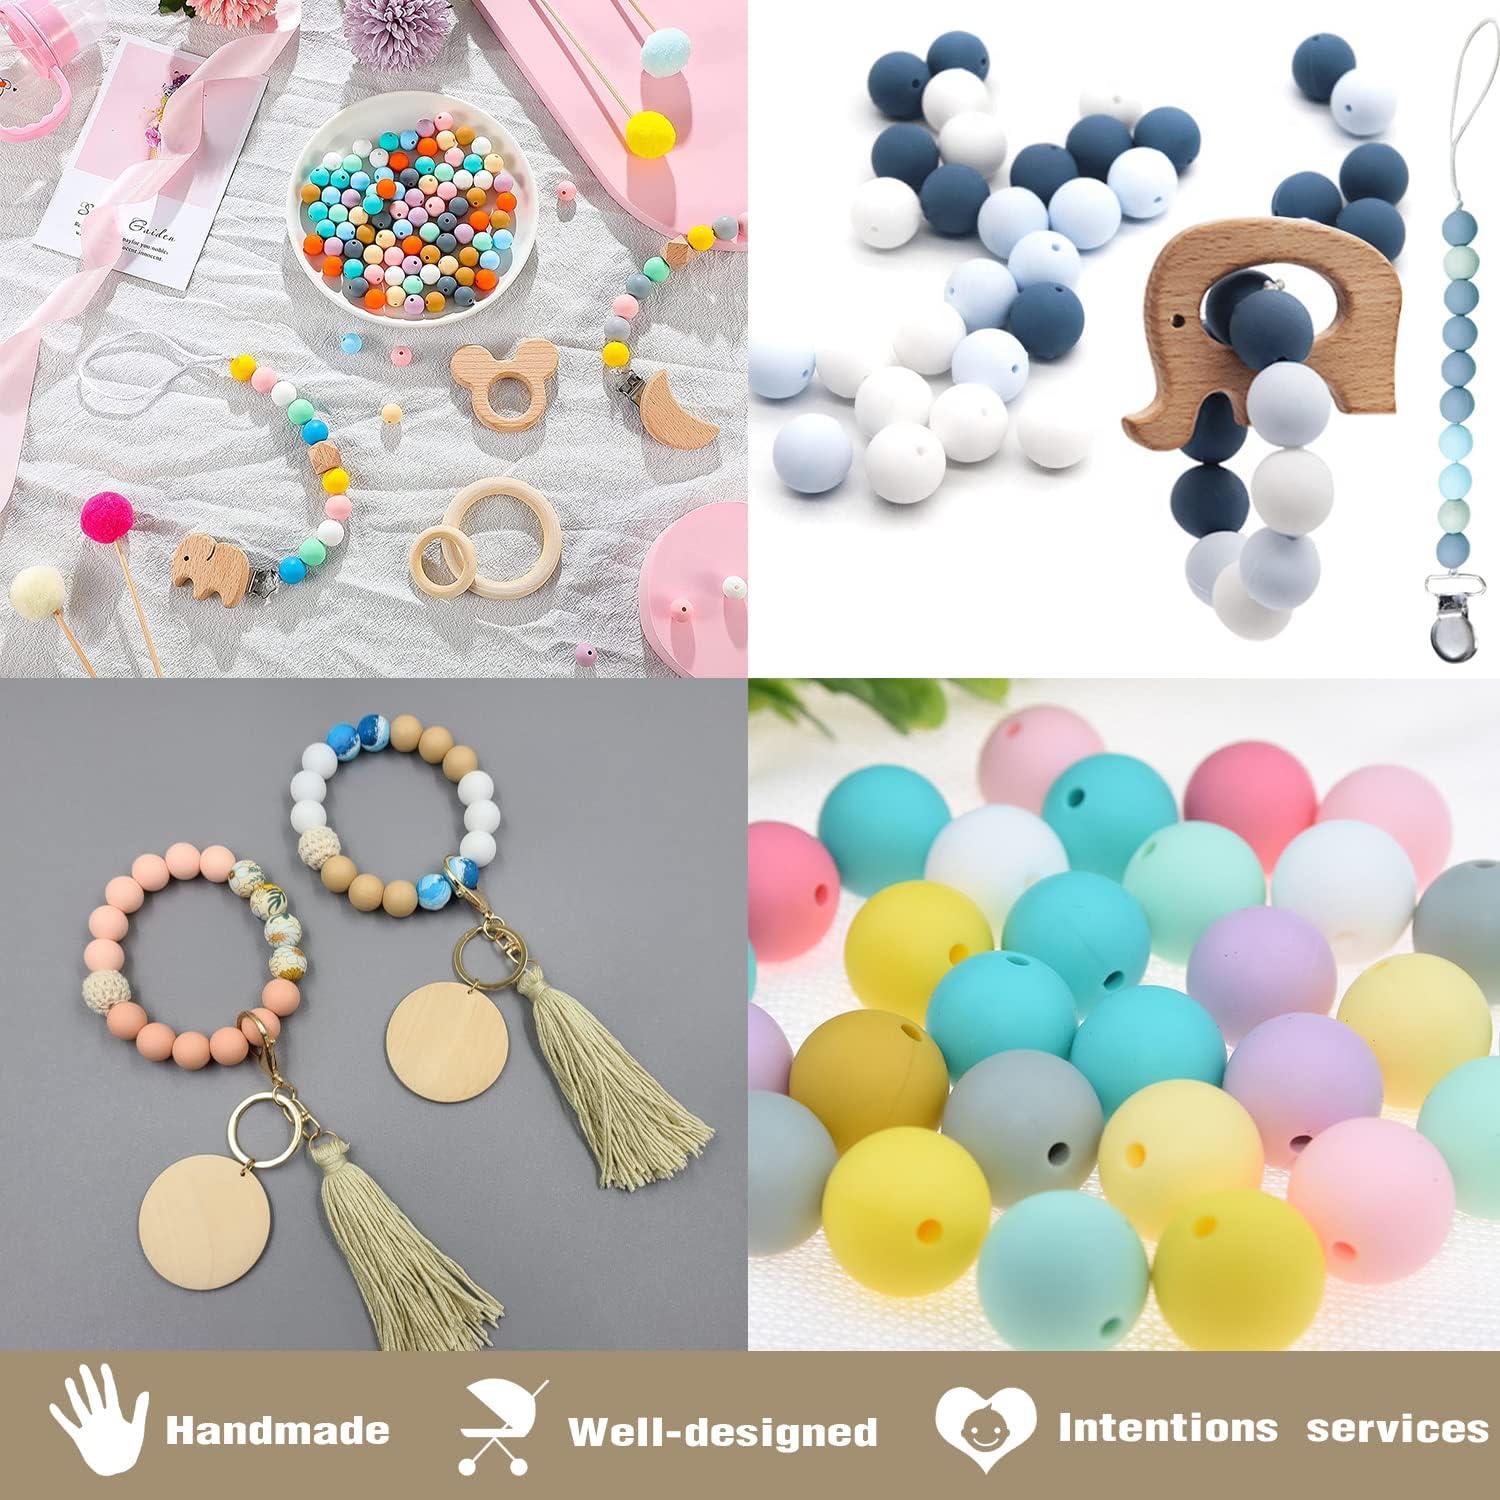 Designer Purse Silicone Focal Beads Now Available on the website!!! RU